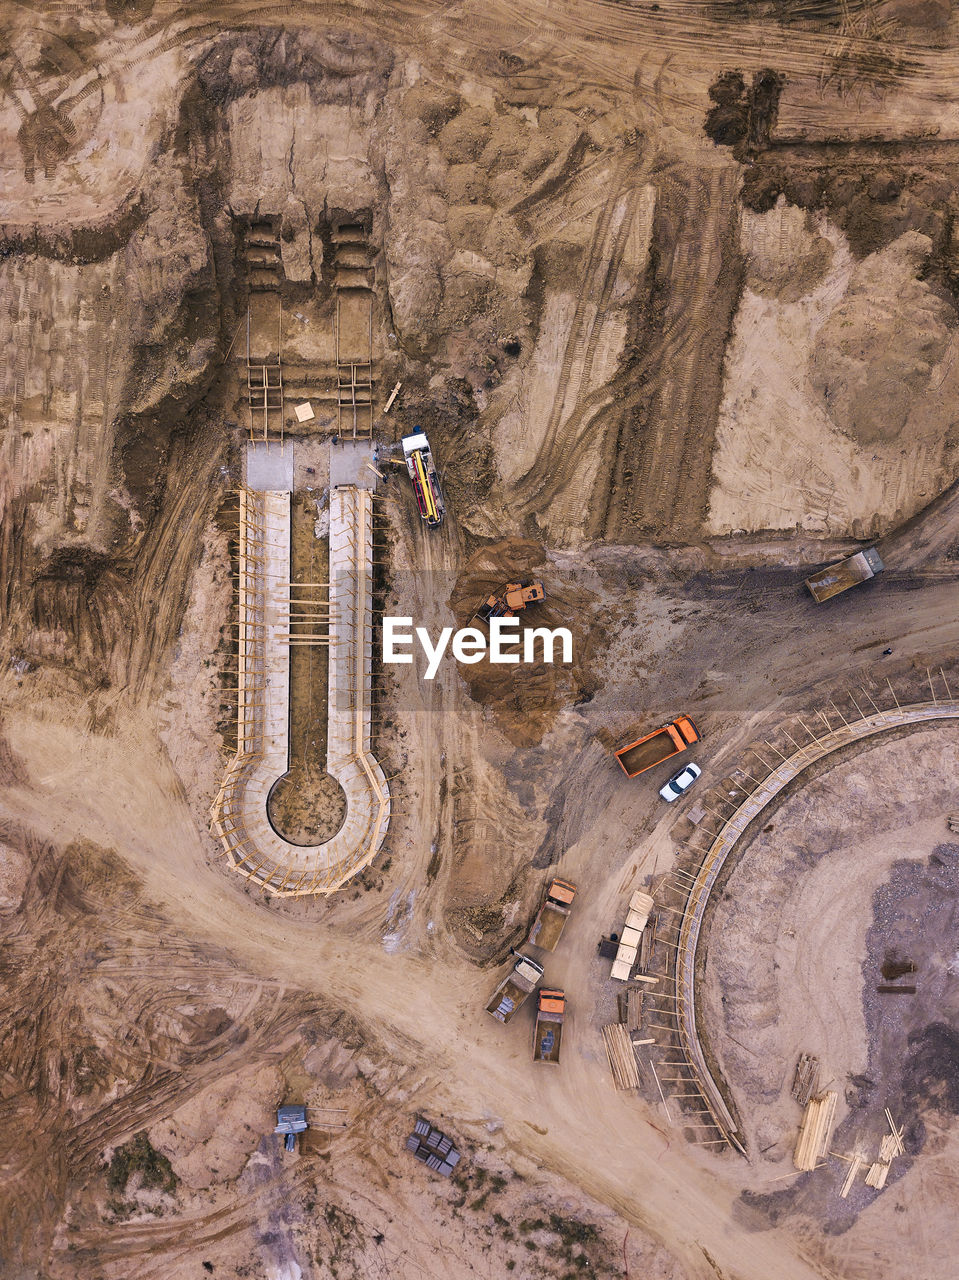 Russia, dagestan, derbent, aerial view of construction site in sandy area